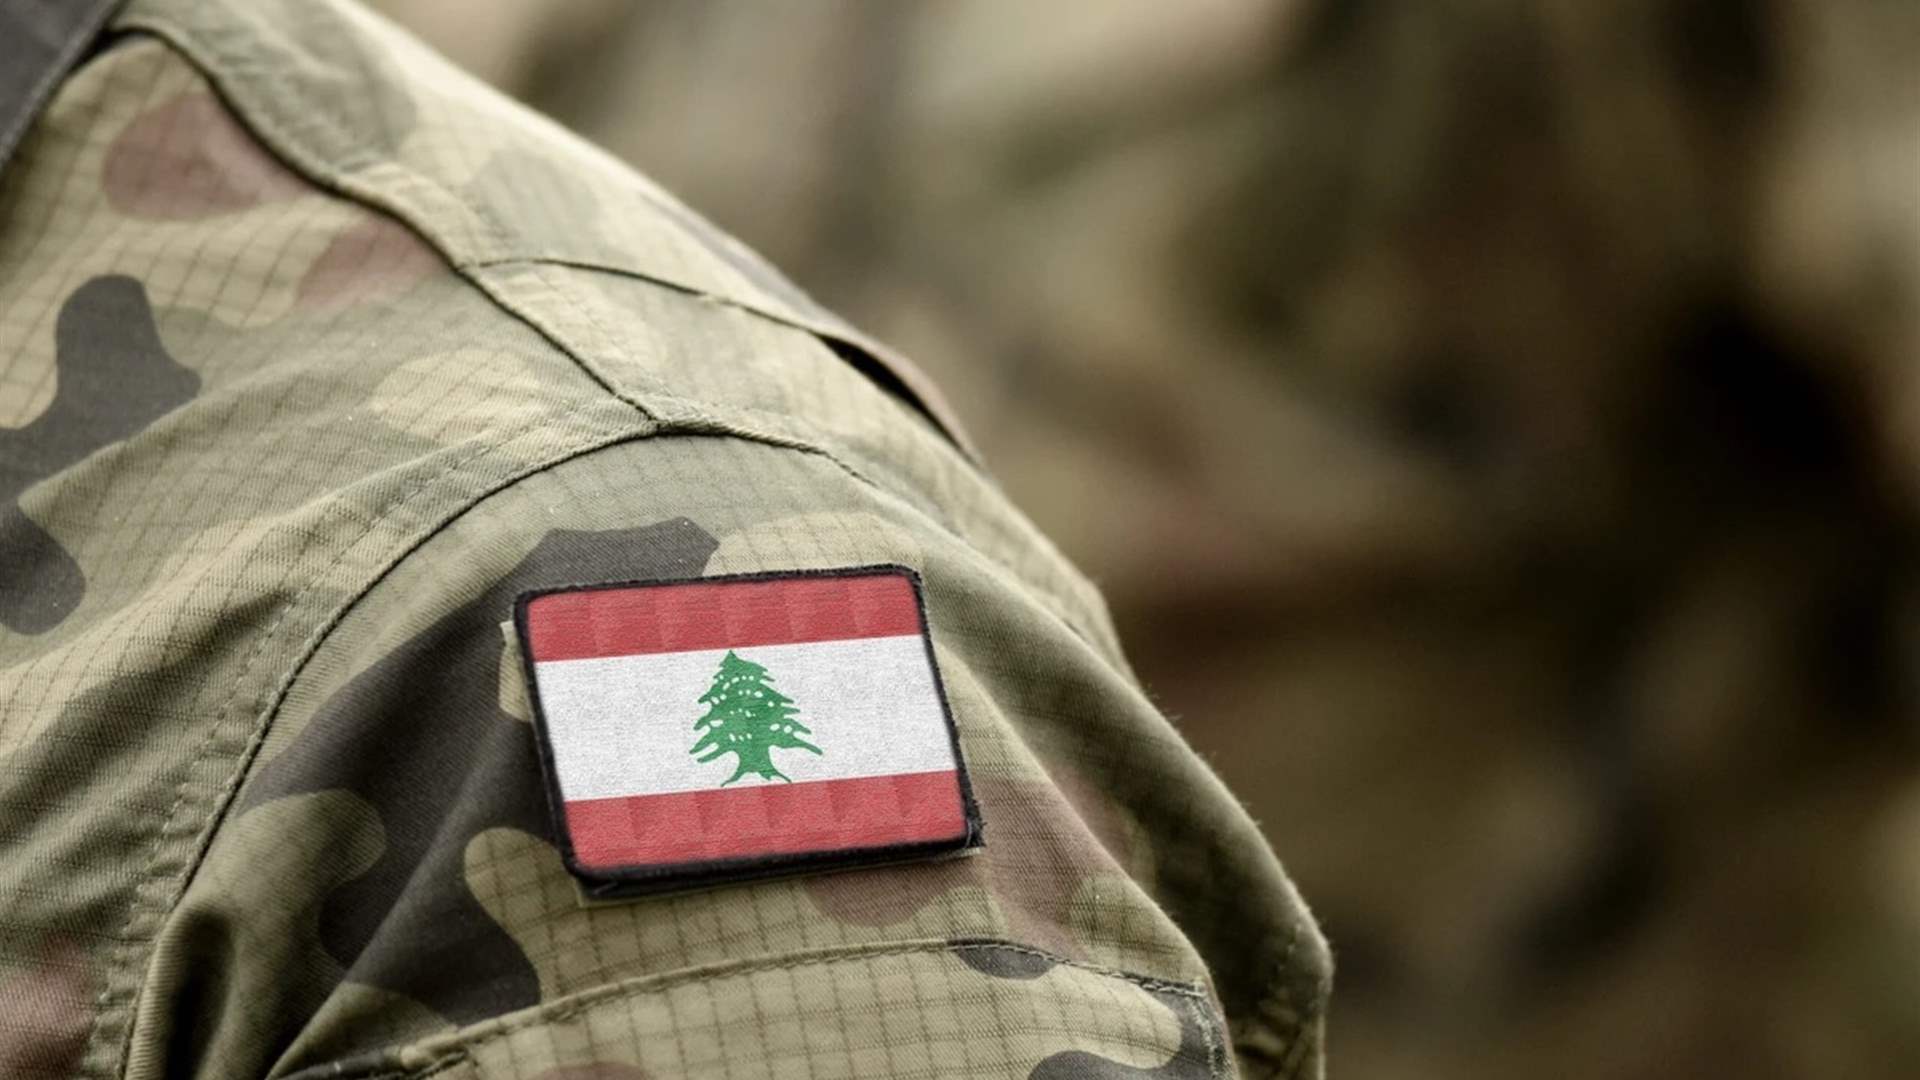 LBCI sources: Four Lebanese Army members wounded as a result of Israeli shelling near Odaisseh